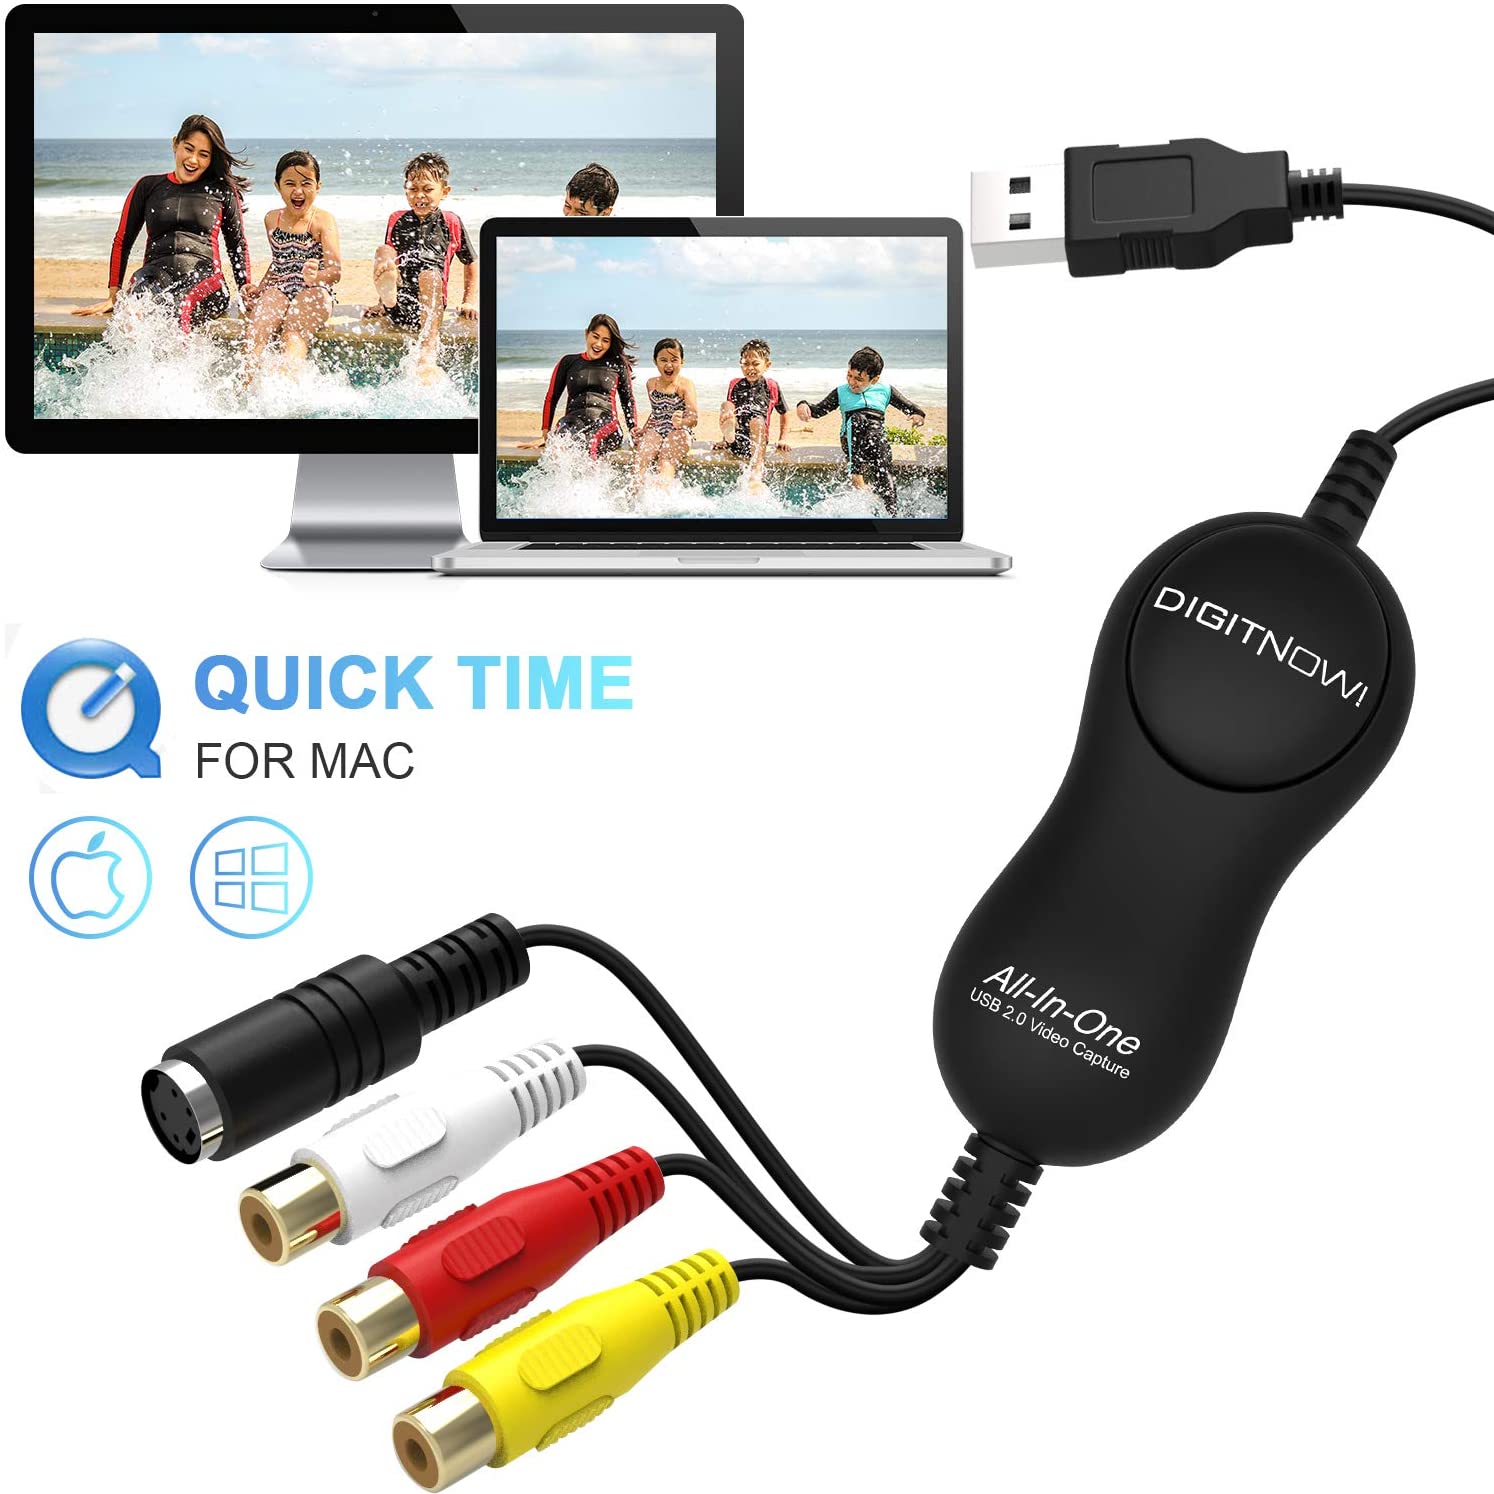 DIGITNOW USB 2.0 Capture Card Device Video Grabber One Touch VHS